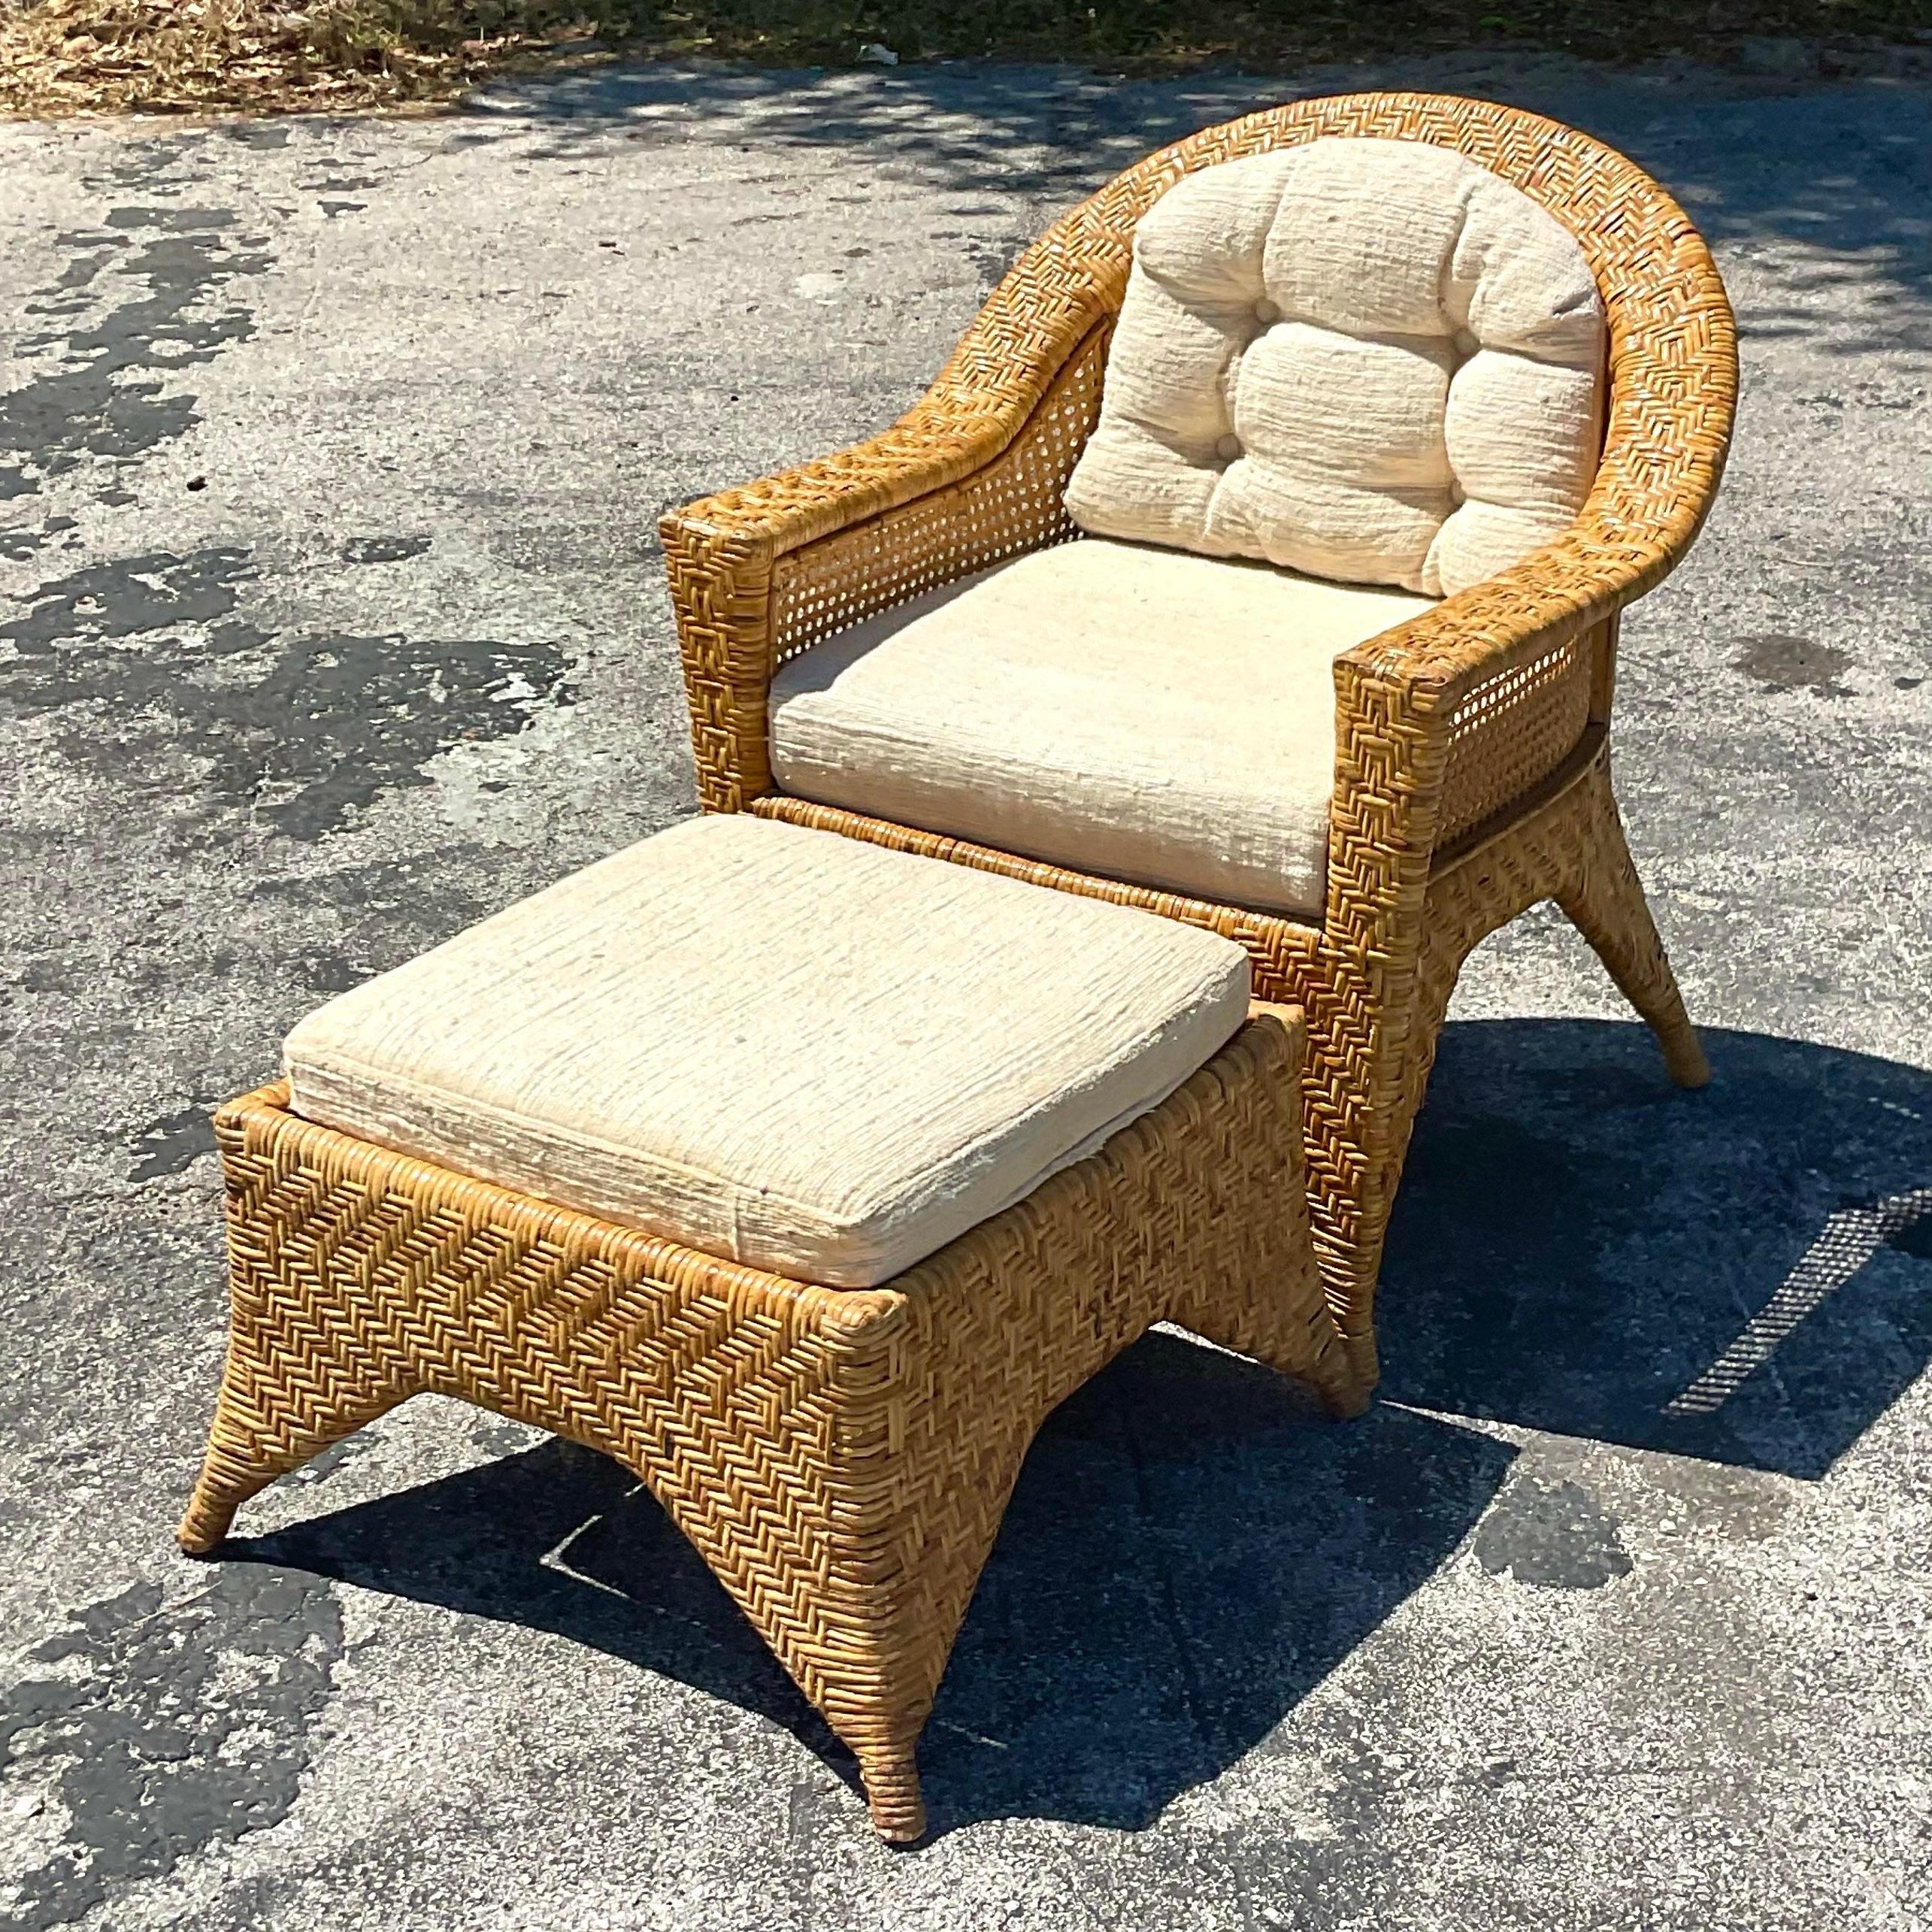 A fabulous vintage chair and ottoman set. The set is made with basket weave which adds to their coastal style. Acquired at a Palm Beach estate.

Ottoman dimensions 26.5x26.5x 16.5.